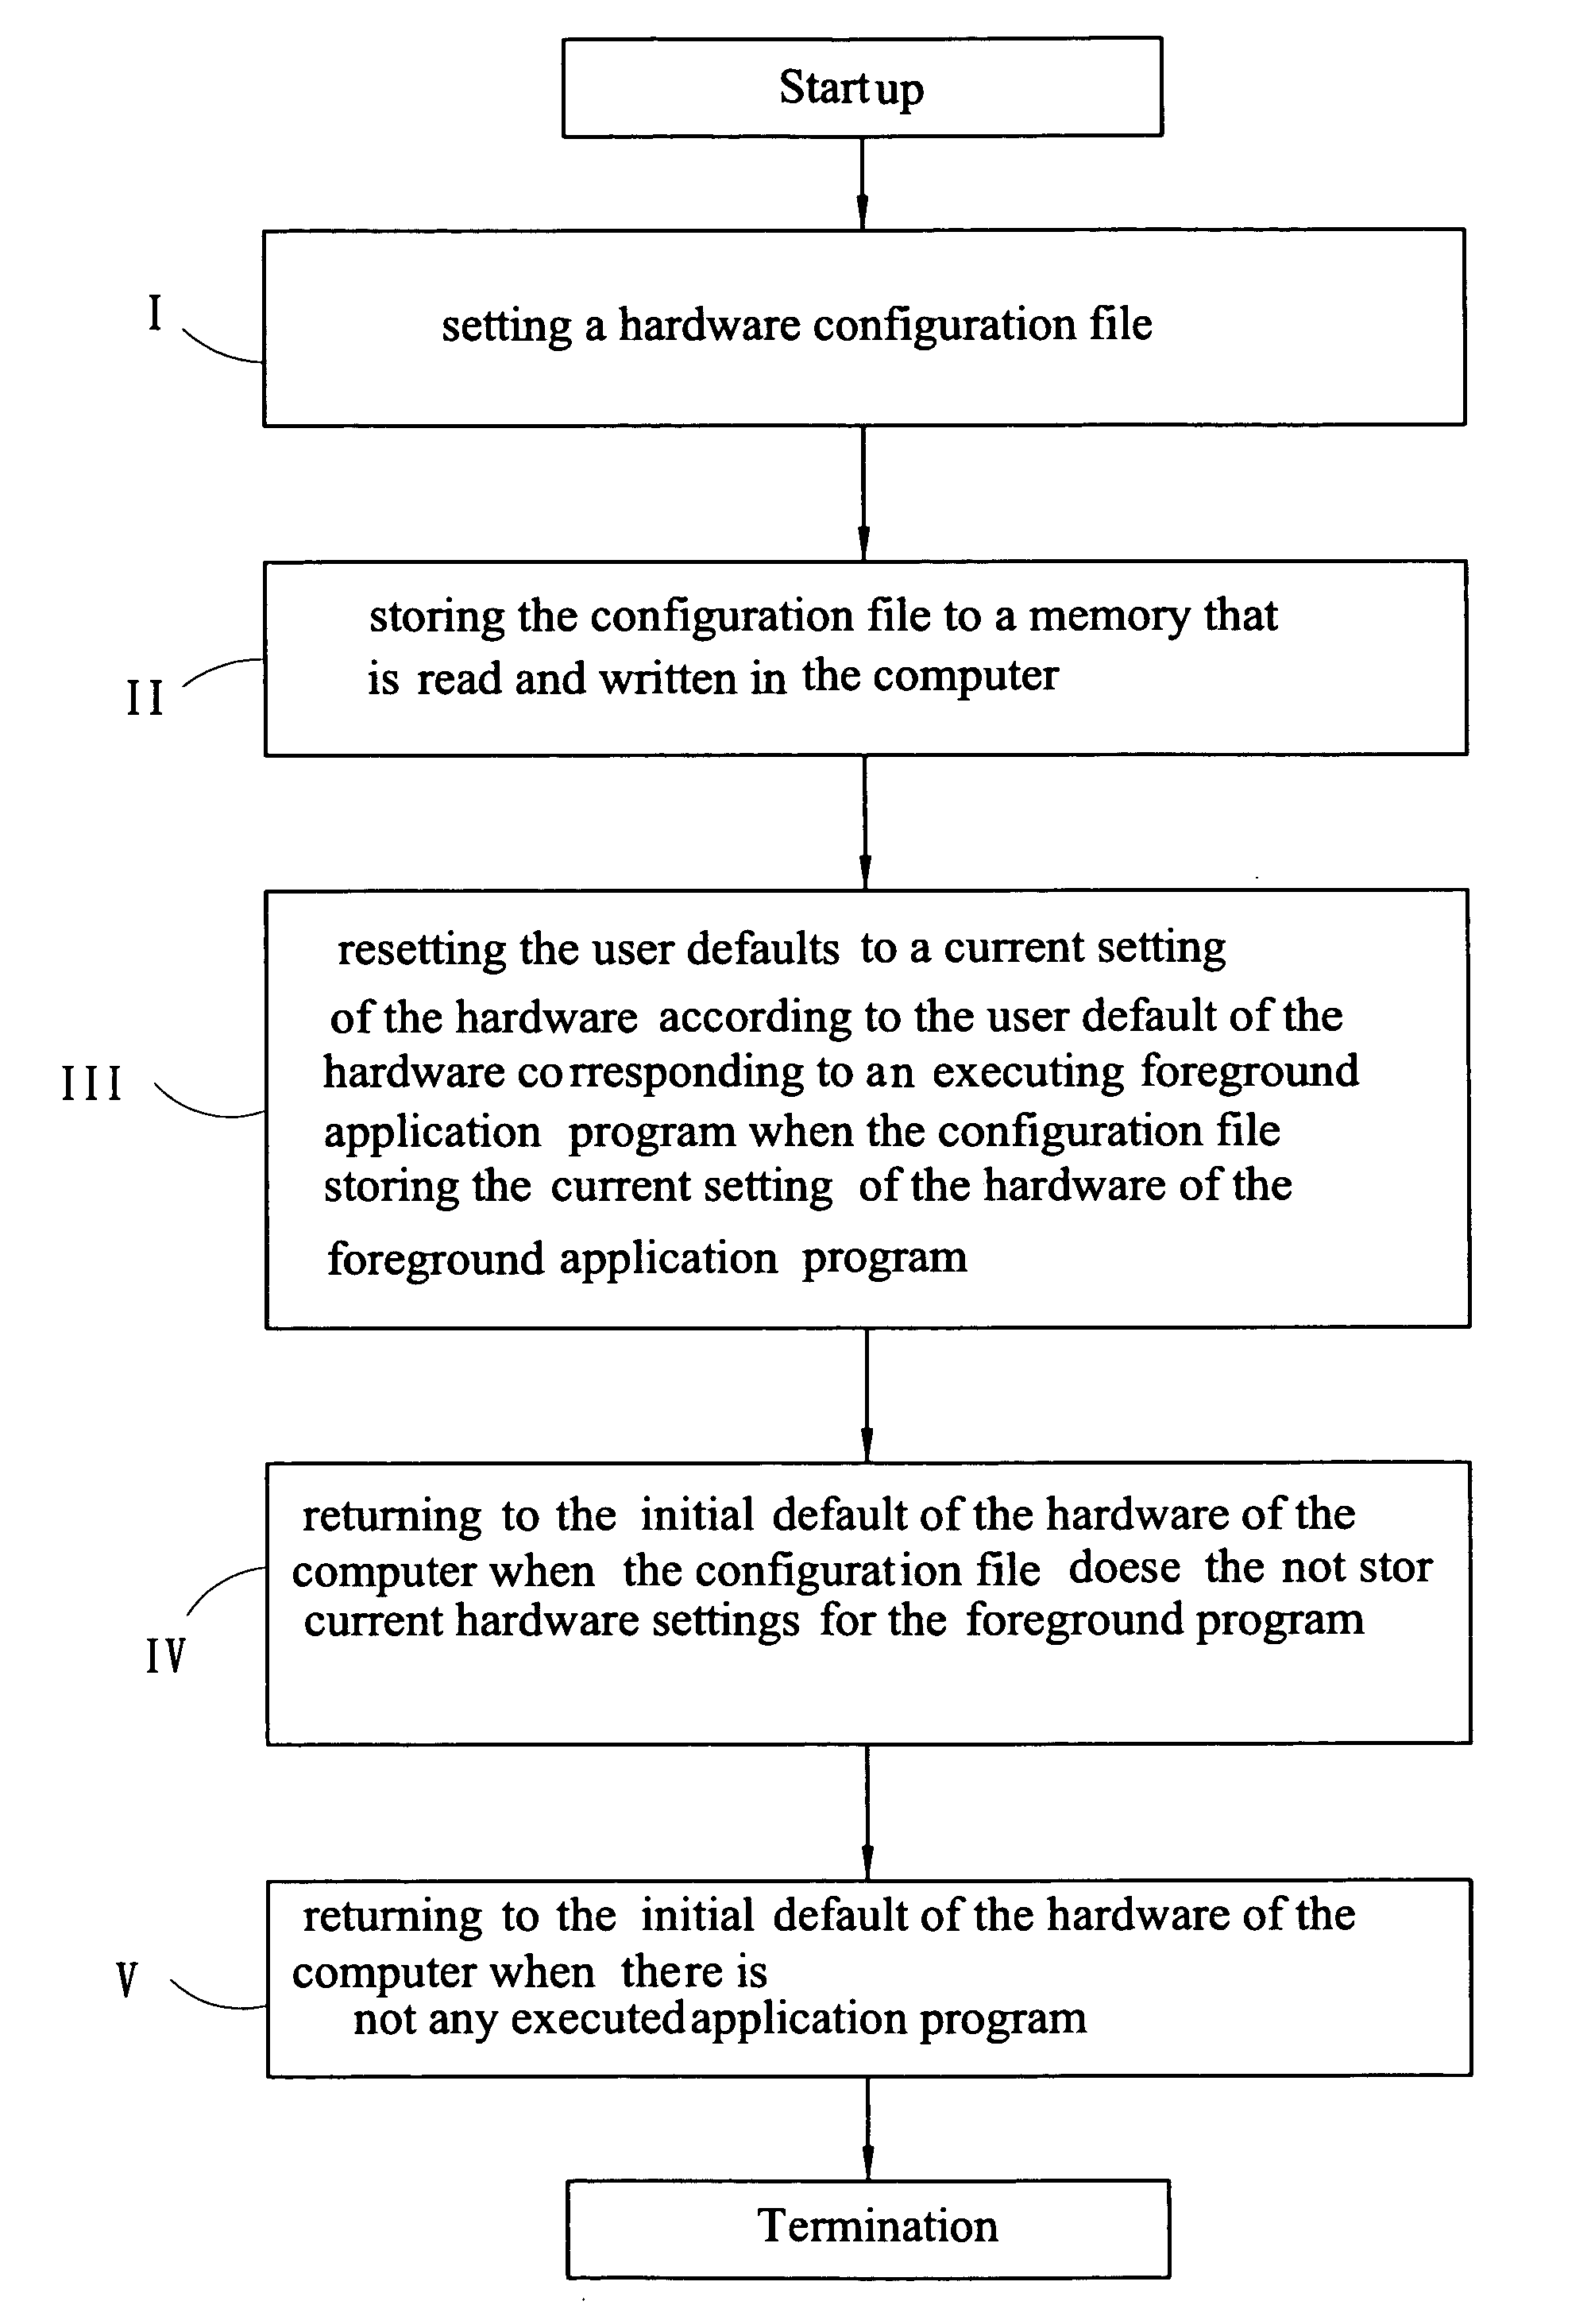 Method for automatically changing the hardware settings of a computer in accordance with an executing application program